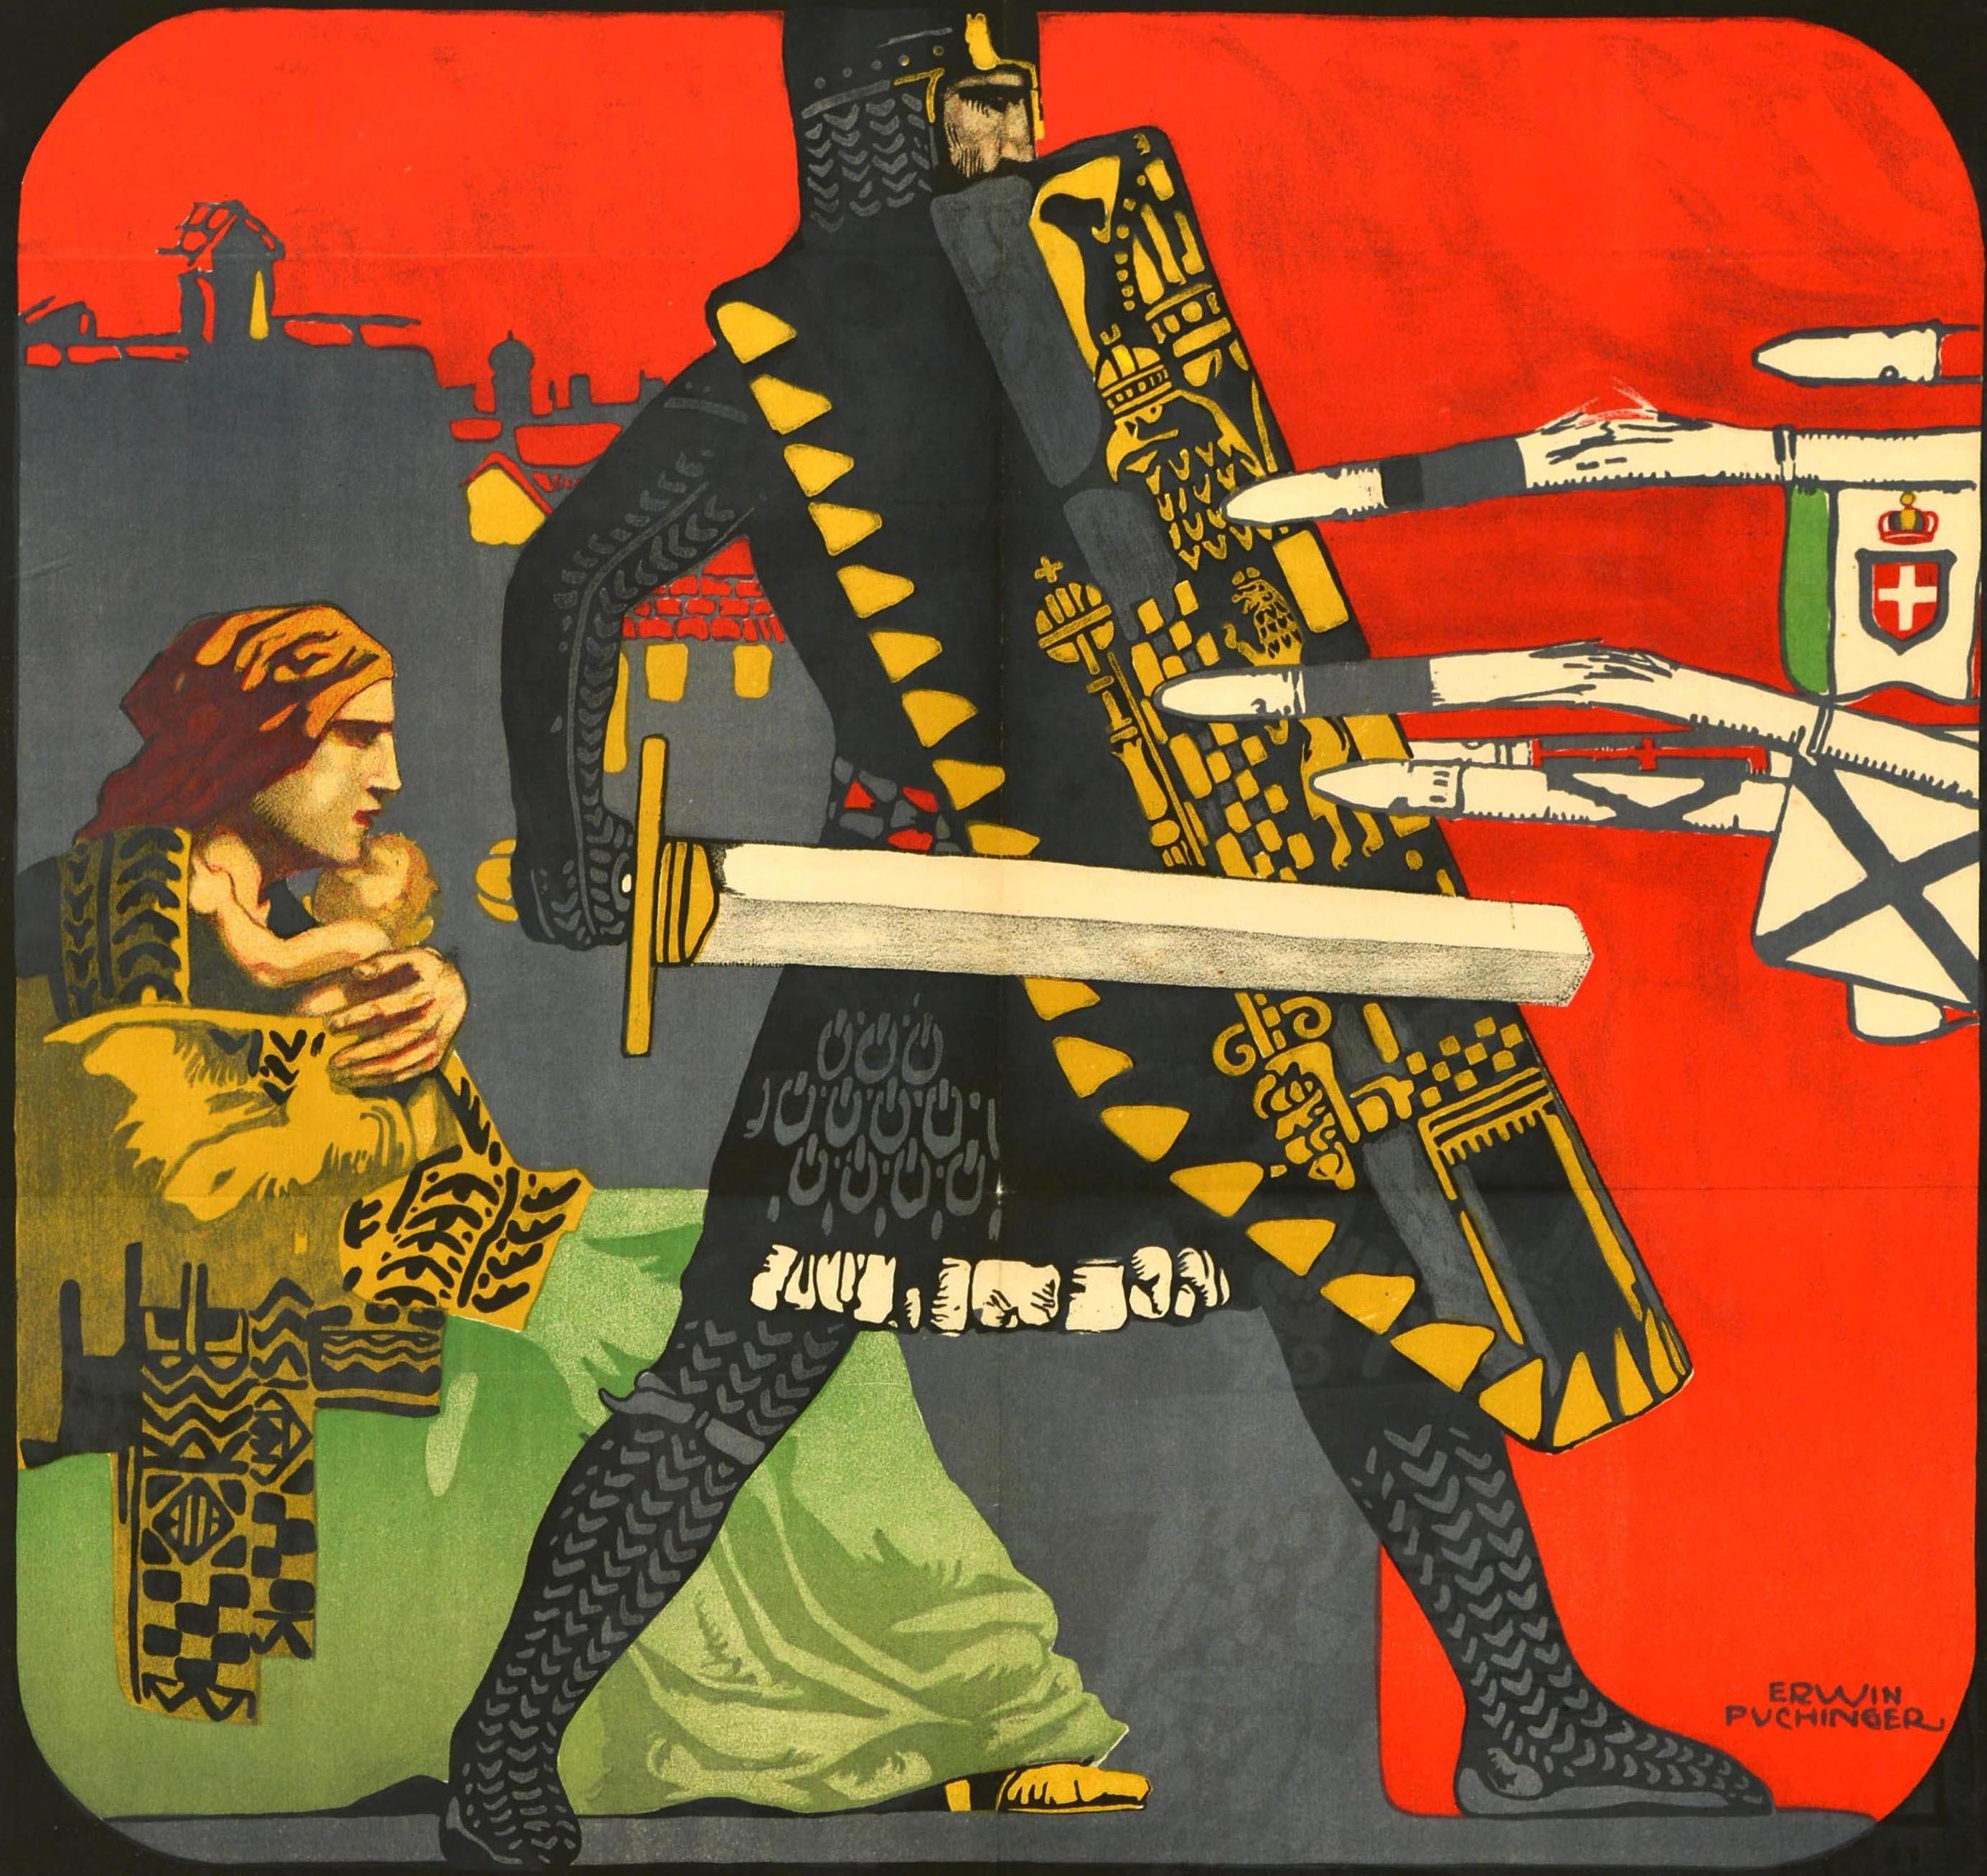 Original antique World War One war bond poster for the 3rd War Loan featuring an illustration by the Viennese artist Erwin Puchinger (1875-1944) depicting a soldier in full military knight armour holding a sword and shield to protect a mother